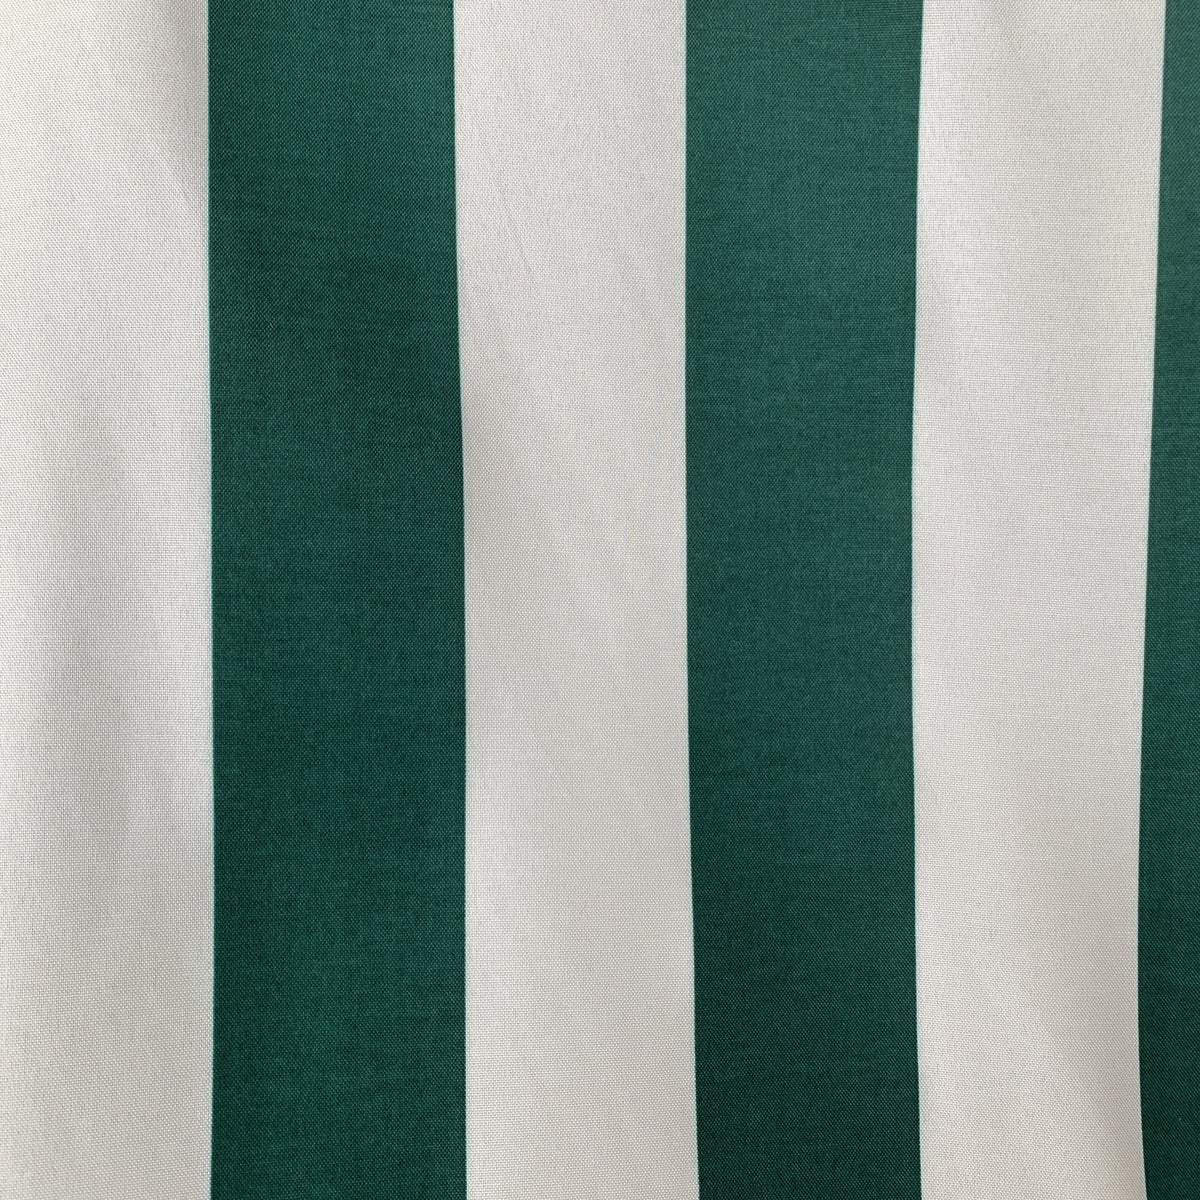 Green and white striped outdoor fabric.